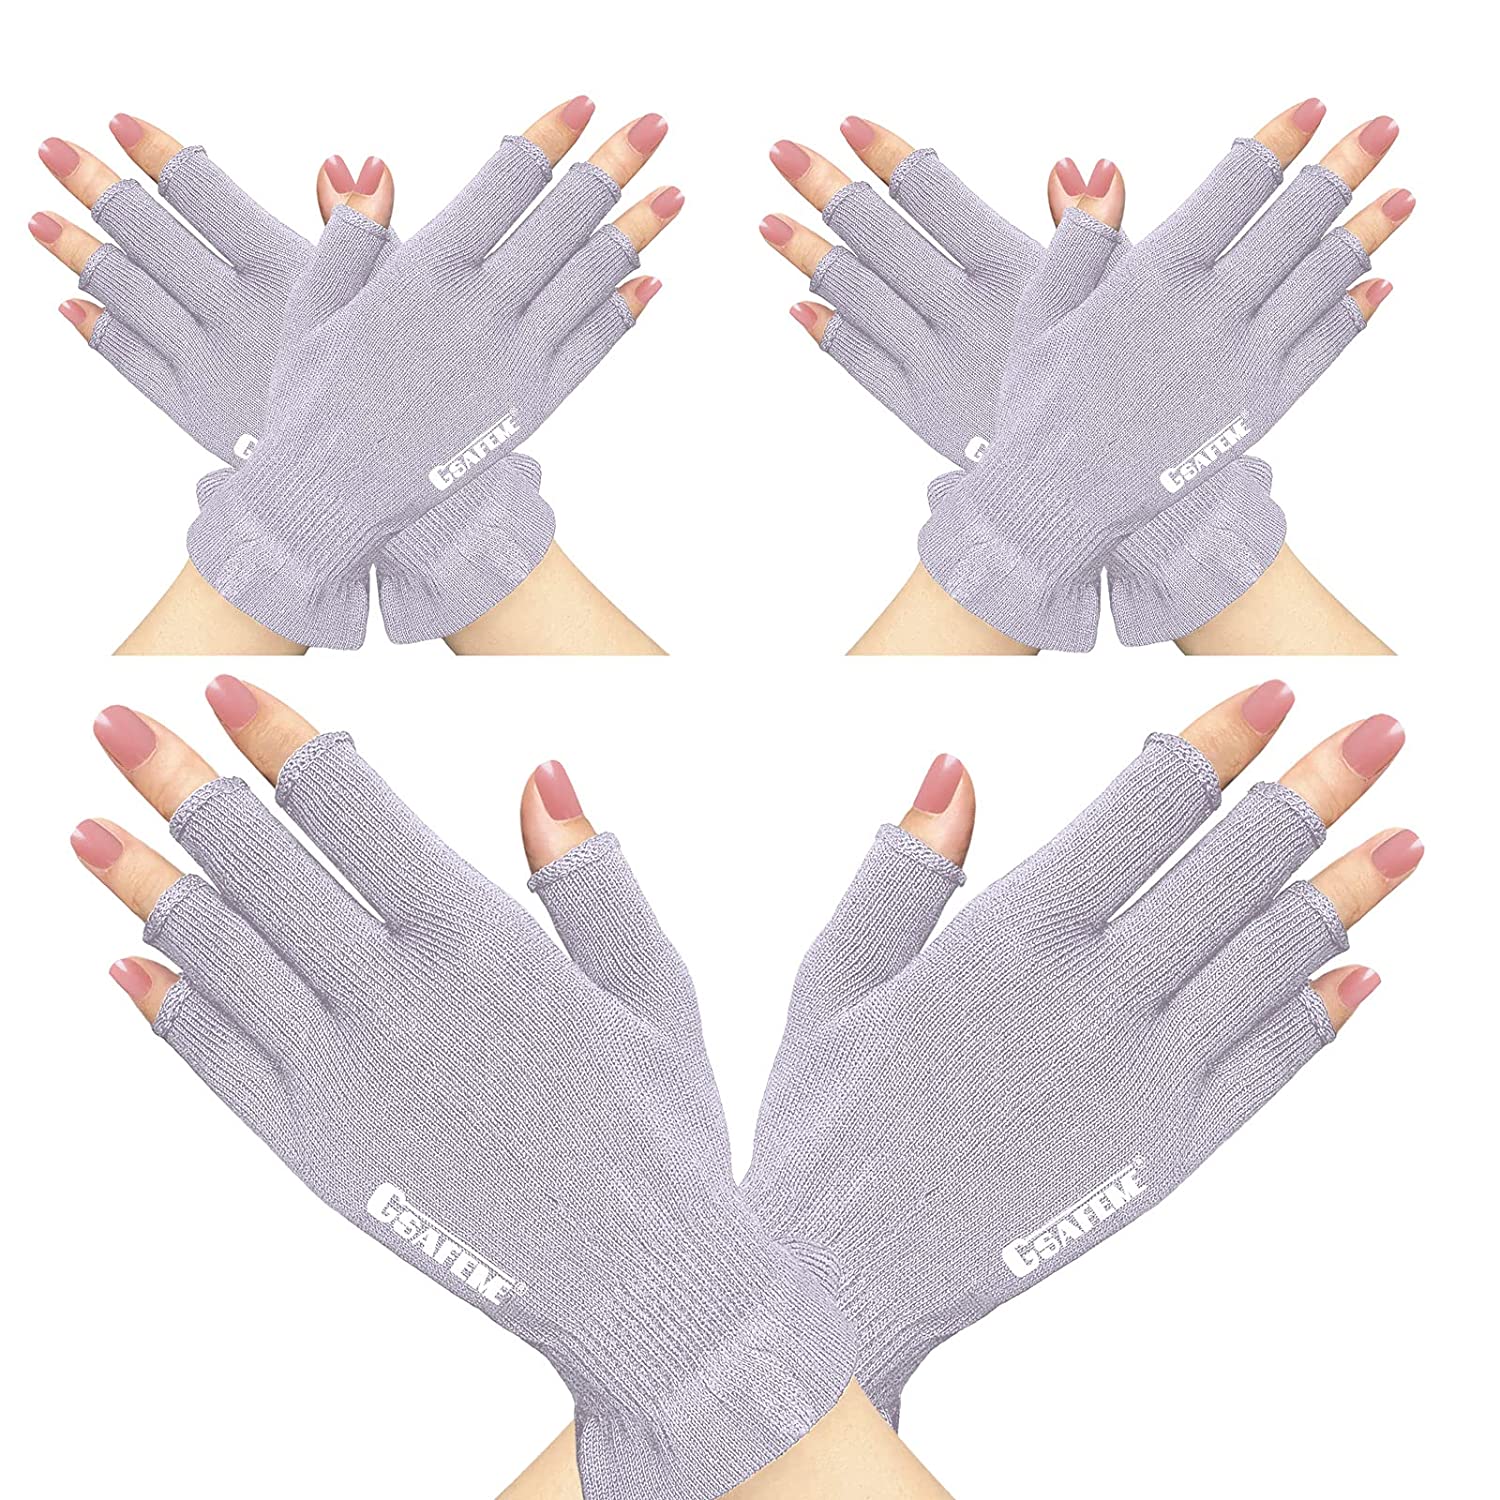 Manicure Gloves Manicure Protection Gloves Uv Protection Manicure Gloves  Nail Lamp Gloves Nail Art Gloves Manicure Gloves UV Protection Stretchy  Breathable Fingerless Fiber Cotton 